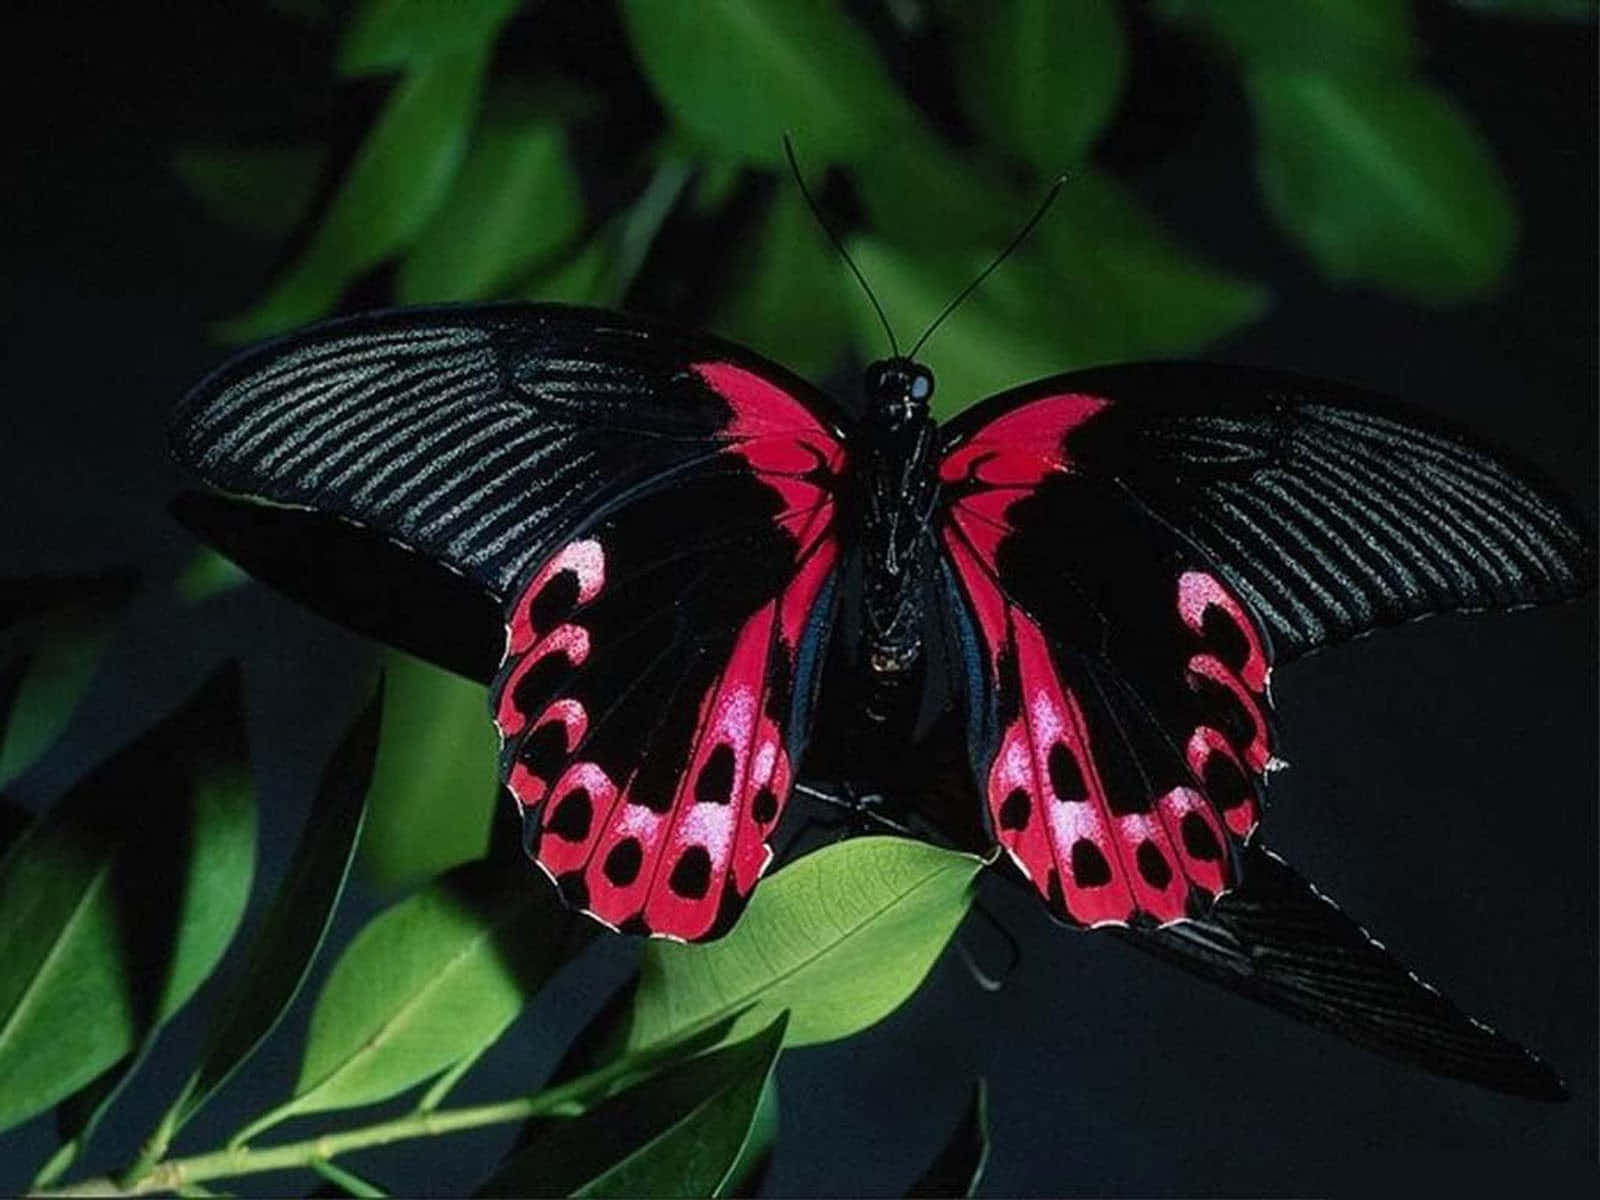 "A close up of a beautiful butterfly species" Wallpaper